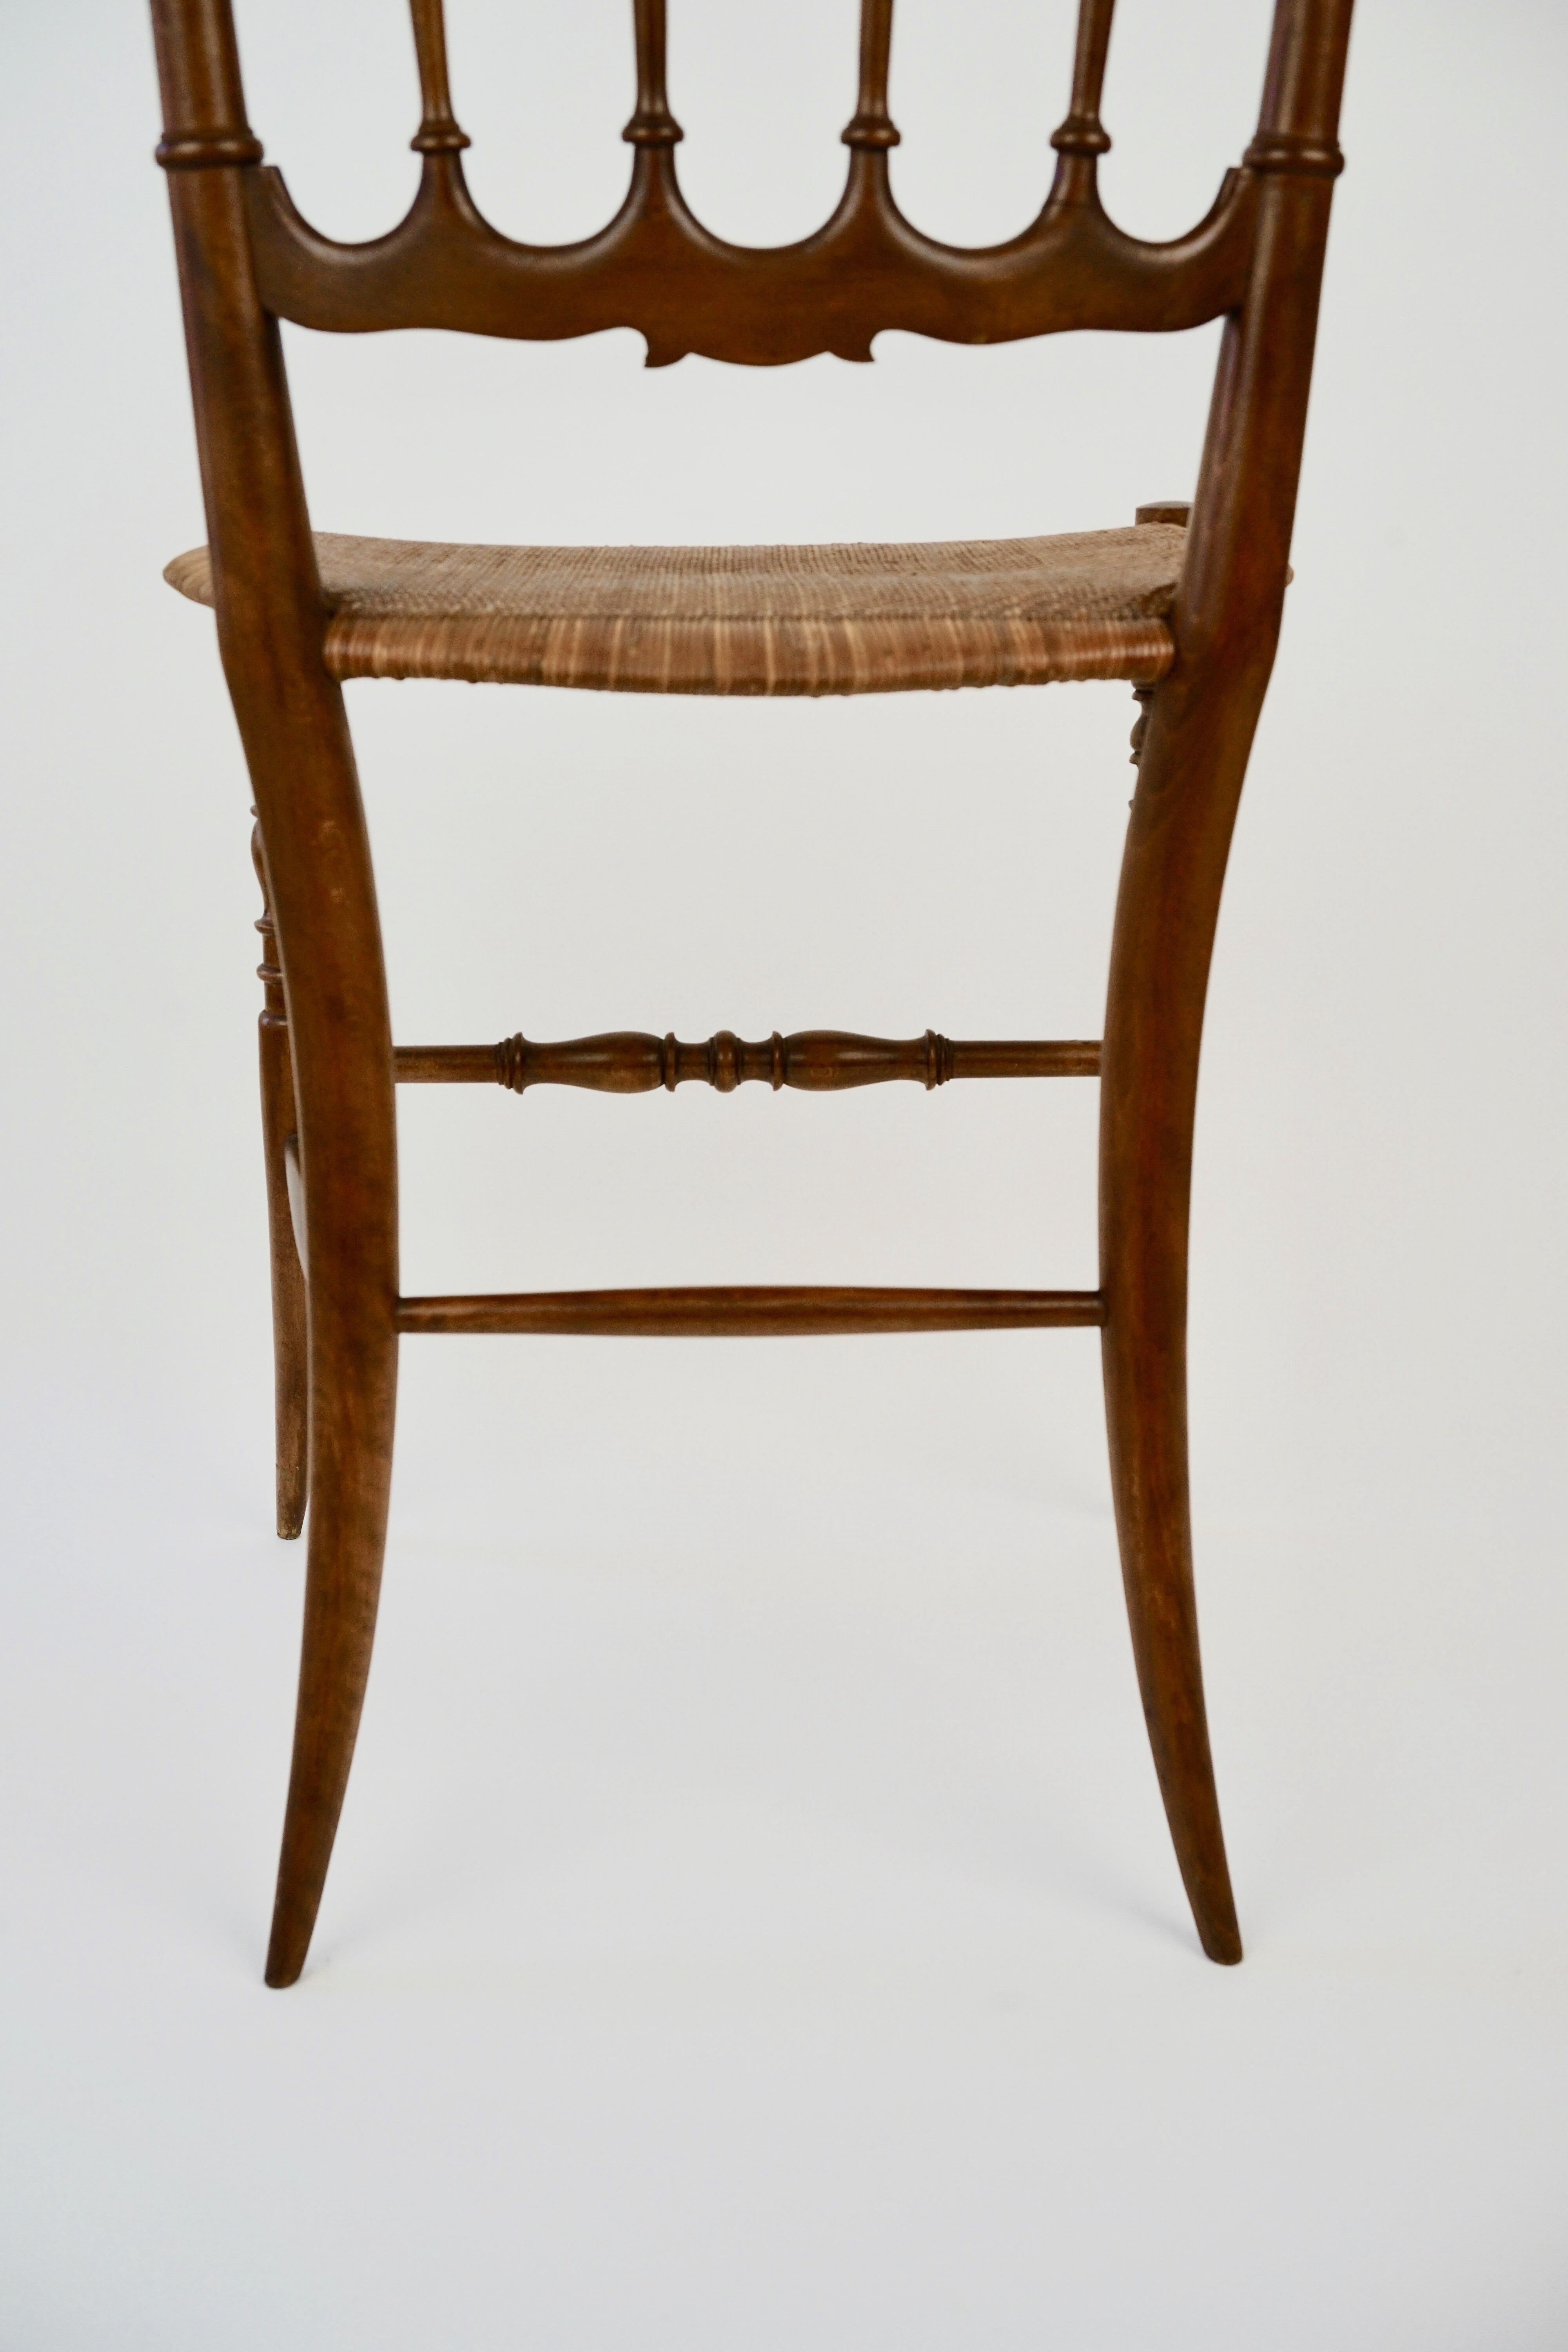 20th Century Mid-Century Chiavari Chair, Model Parisienne, with Cane Seat For Sale